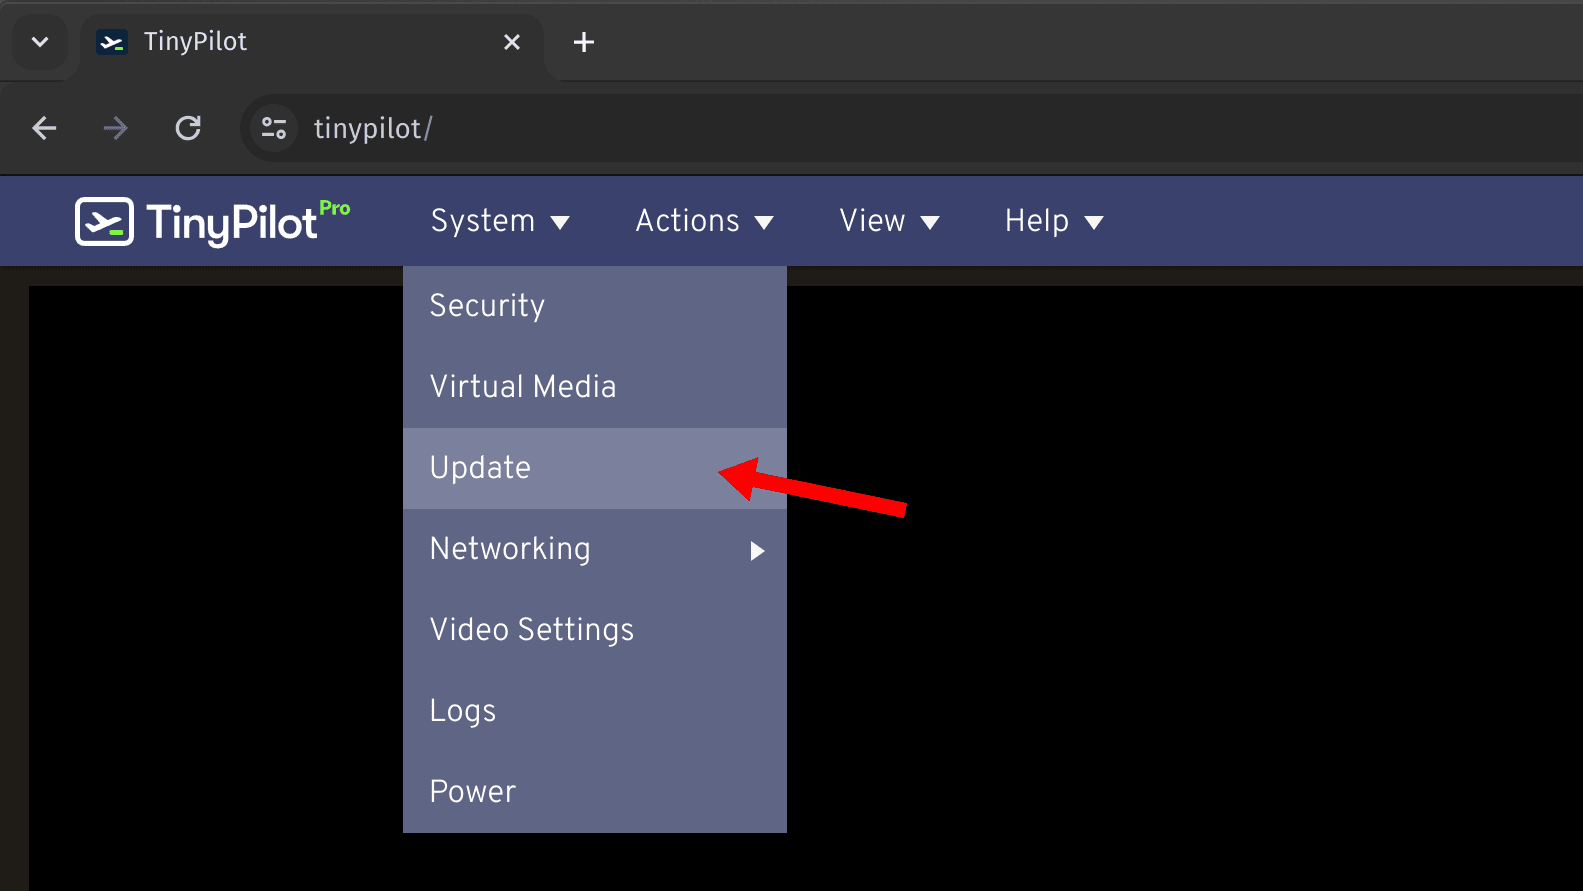 The update button is located in the navbar under System